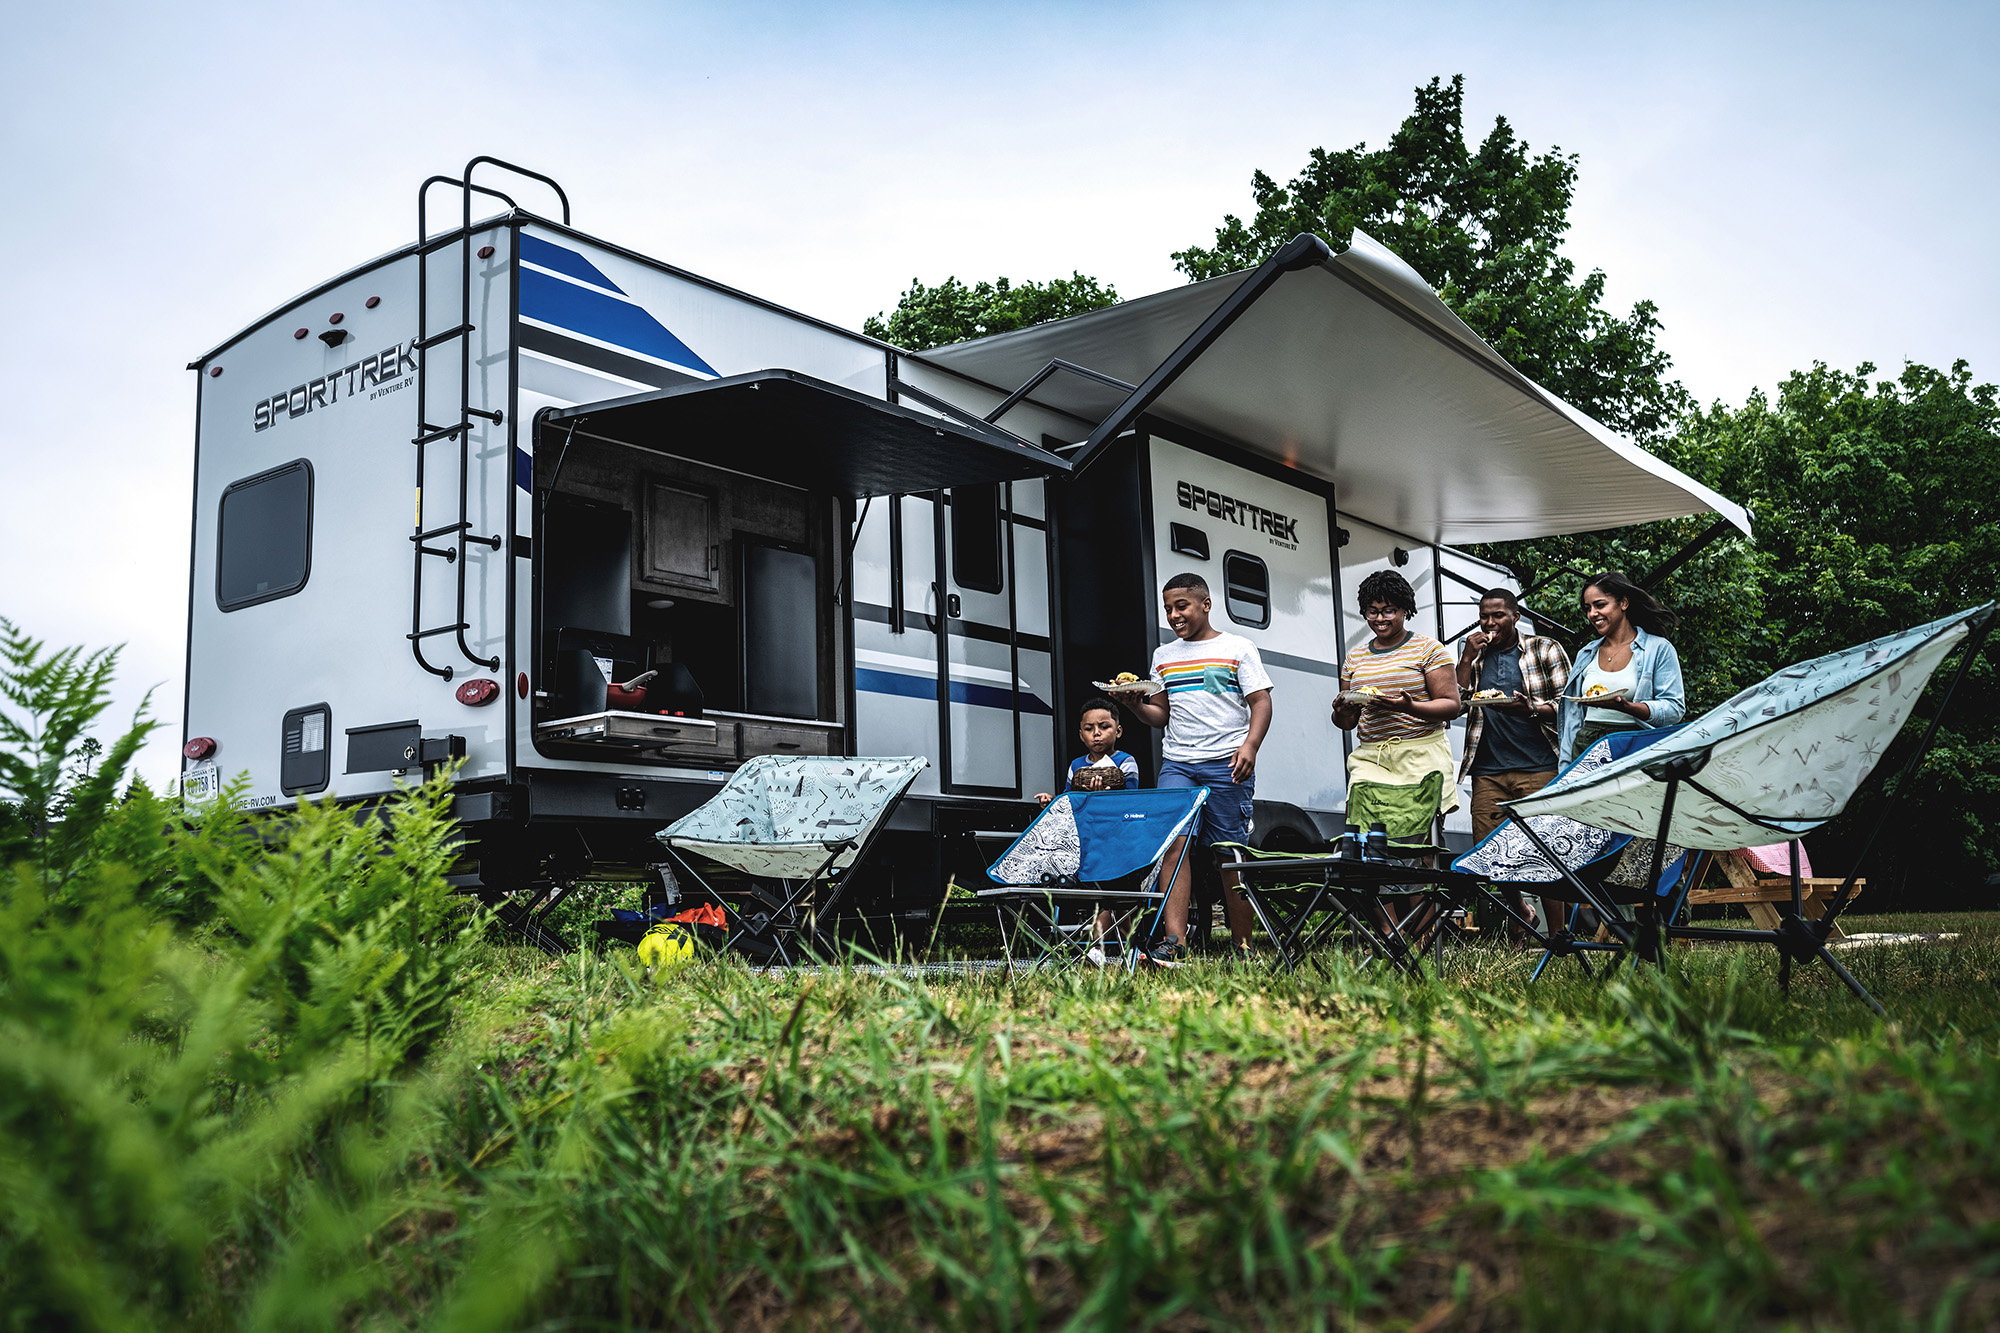 Conquering camper cupboards - The Touring Camper